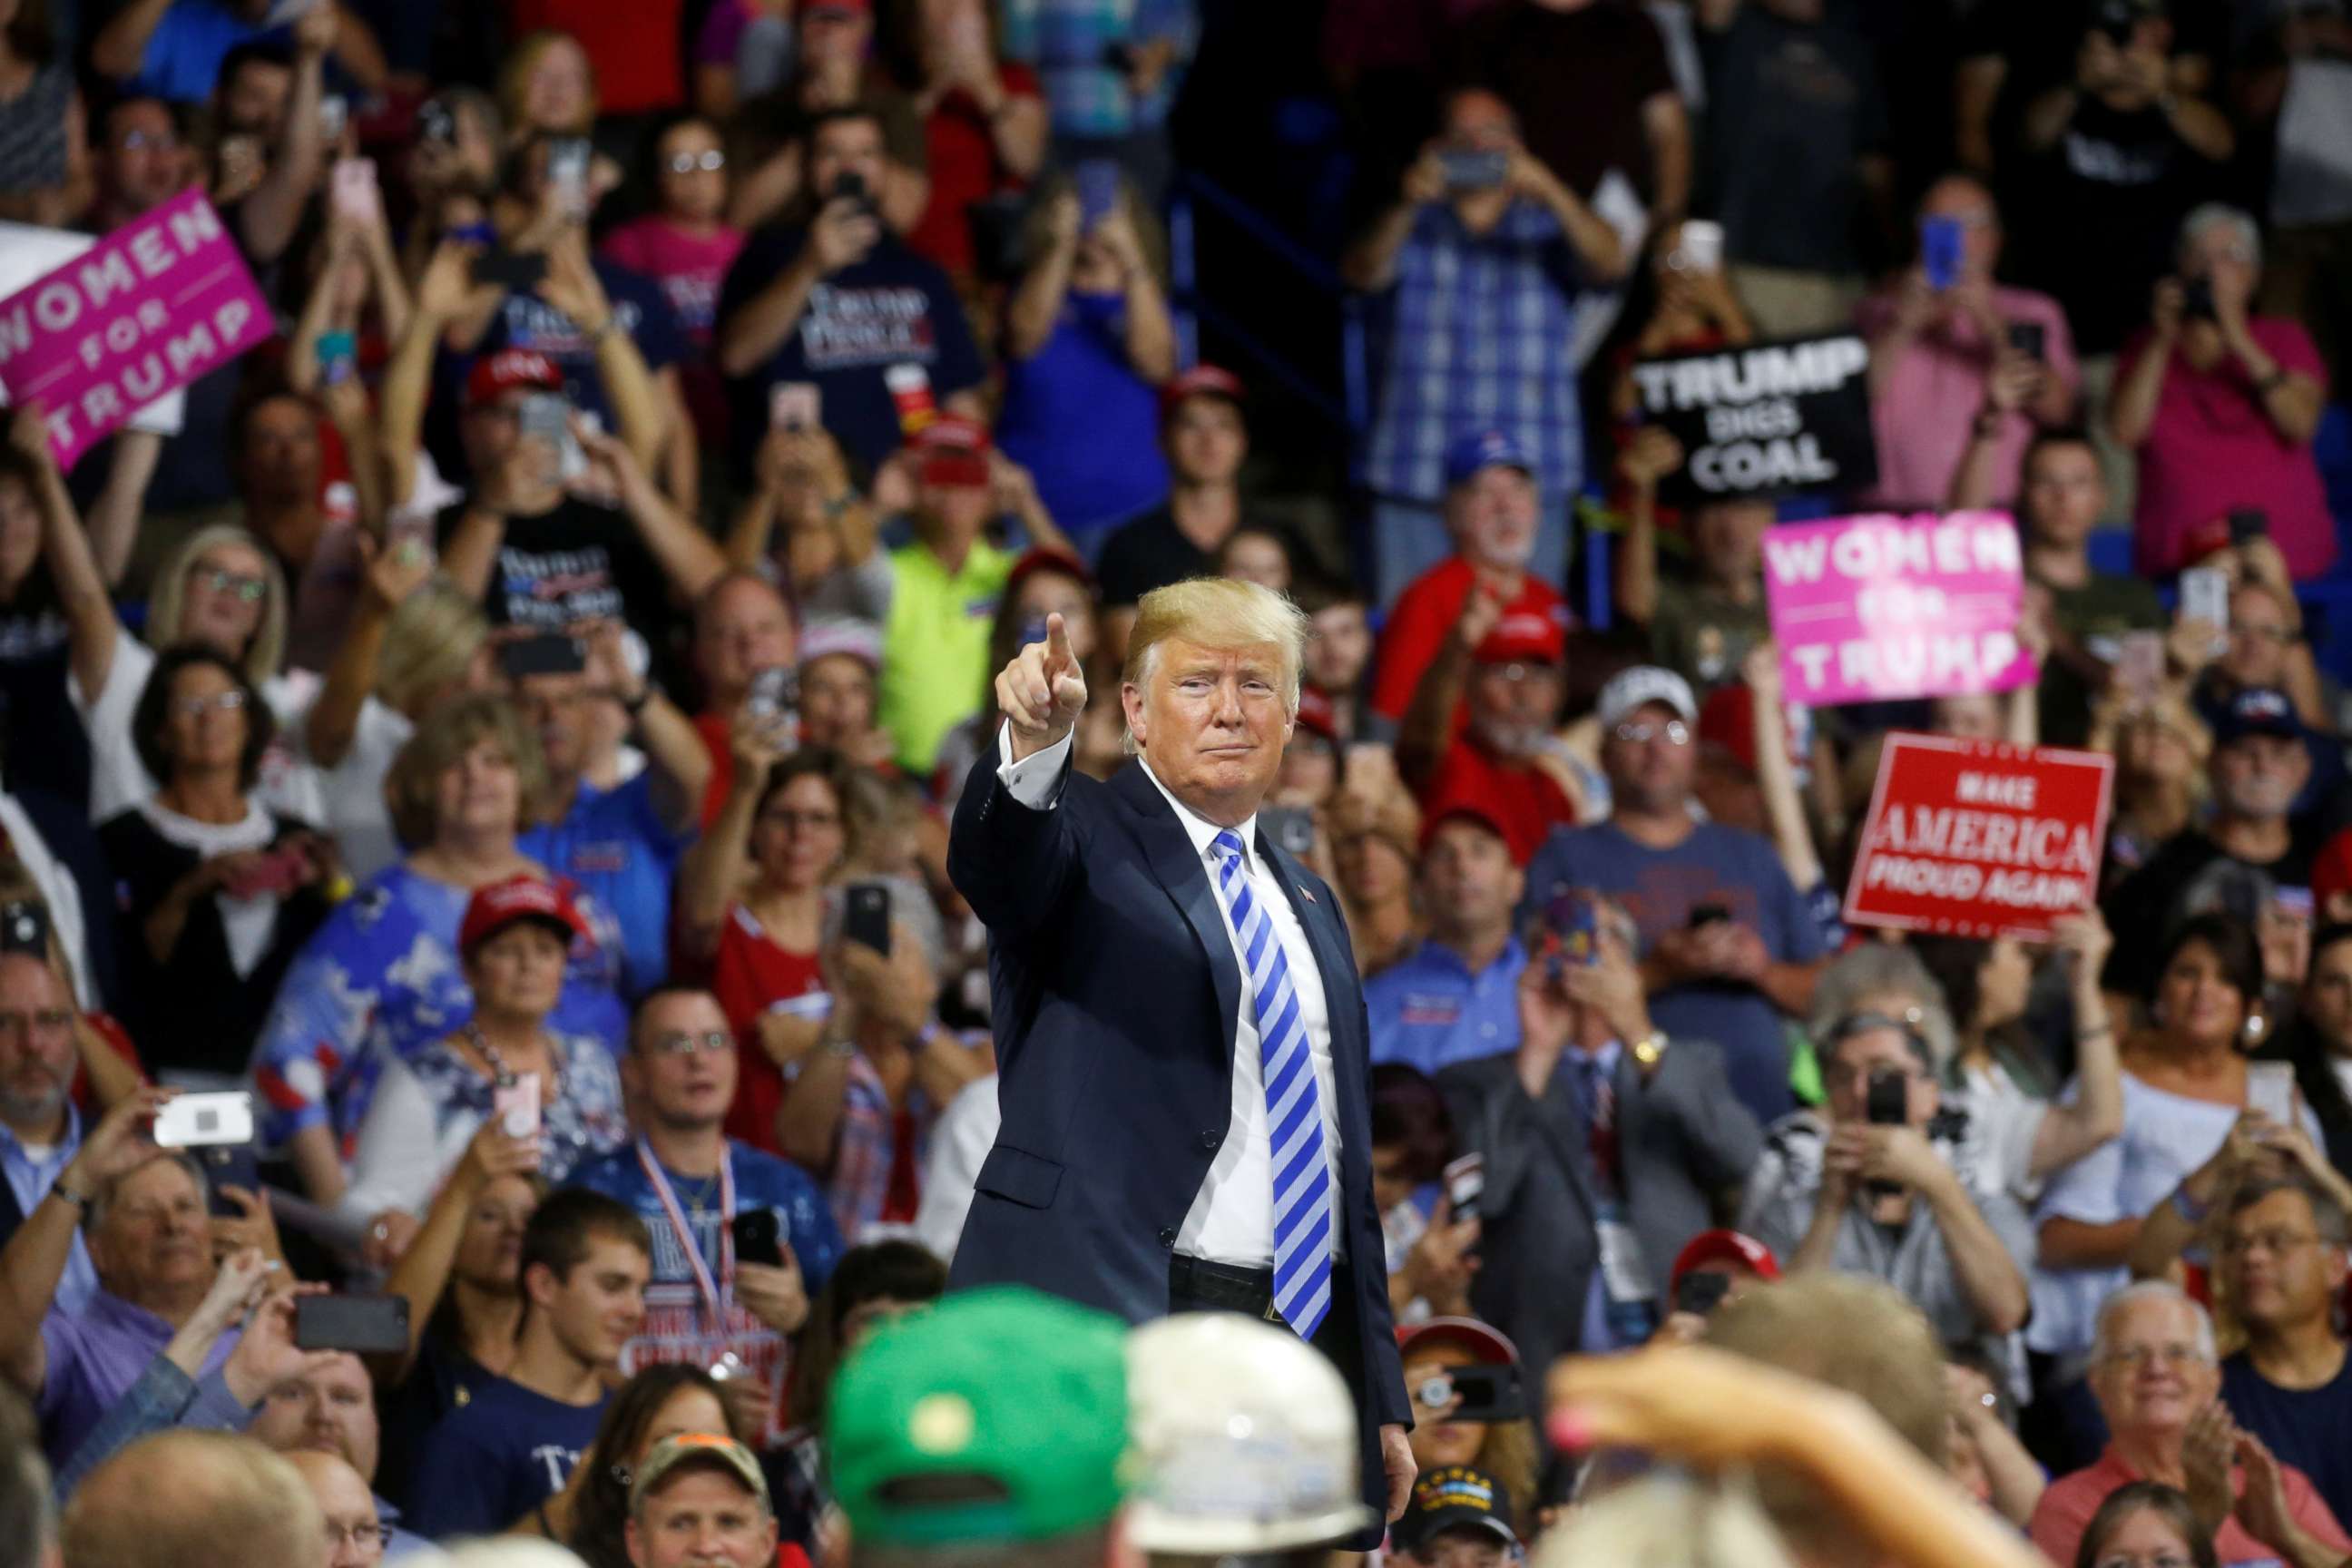 PHOTO: Donald Trump acknowledges supporters during a Make America Great Again rally at the Civic Center in Charleston, West Virginia, Aug. 21, 2018.